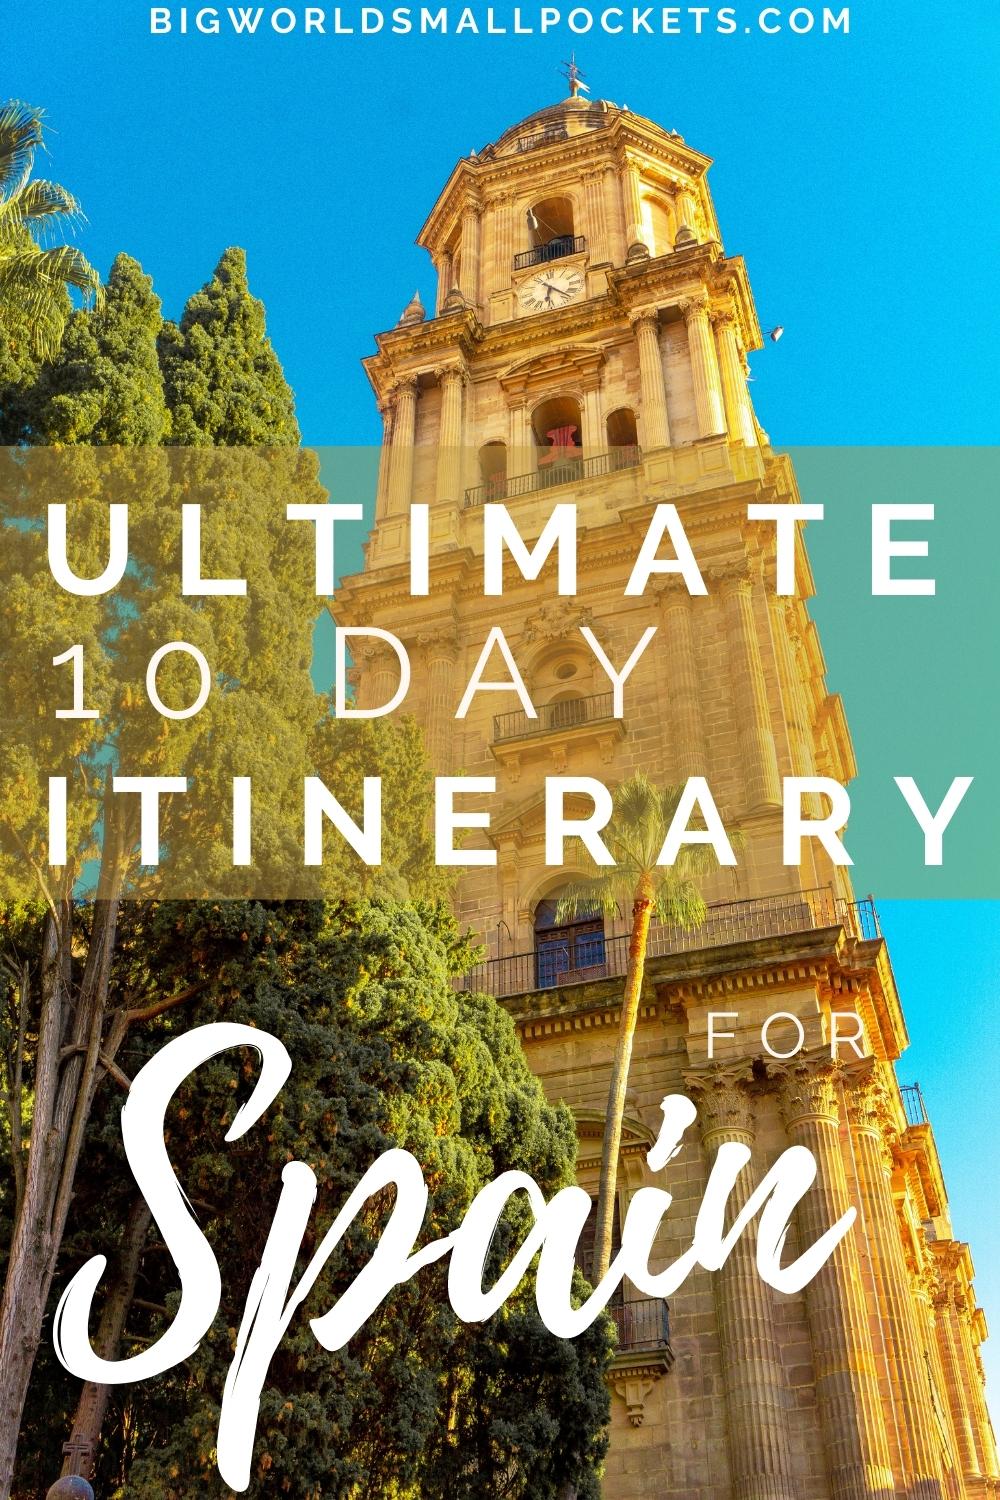 Top 10 Day Travel Itinerary for Spain